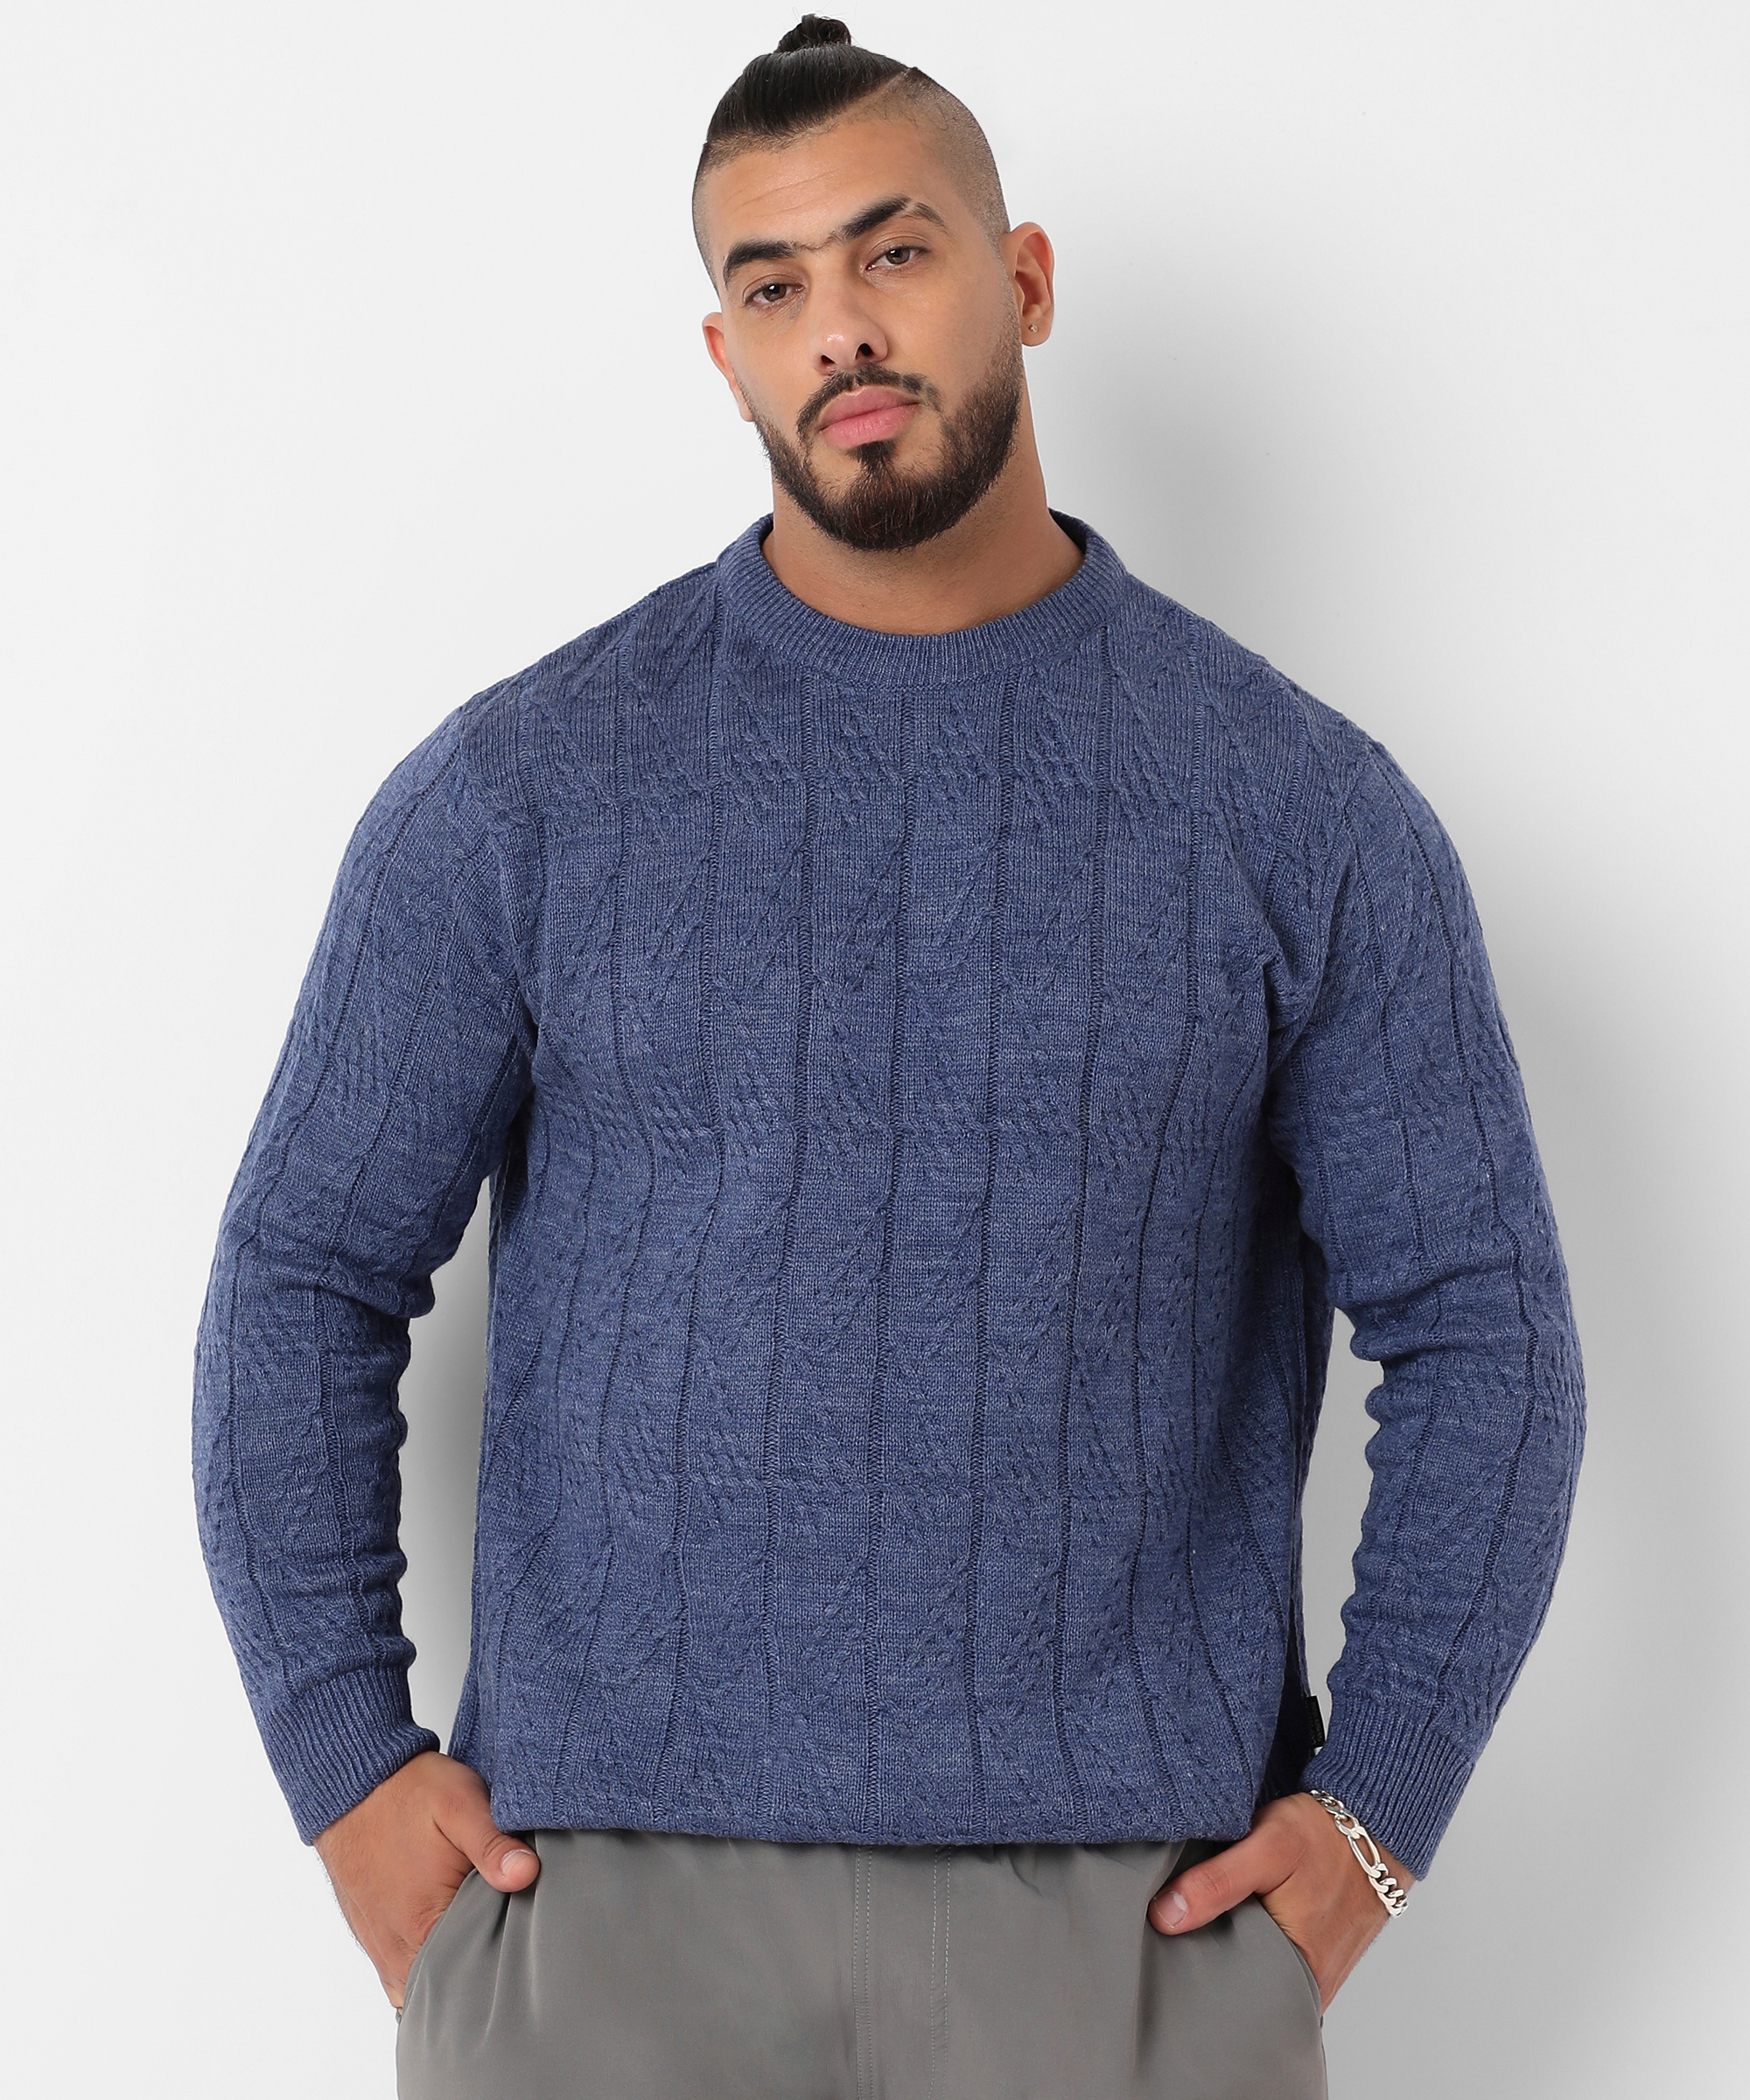 Instafab Plus | Men's Blue Textured Knit Pullover Sweater